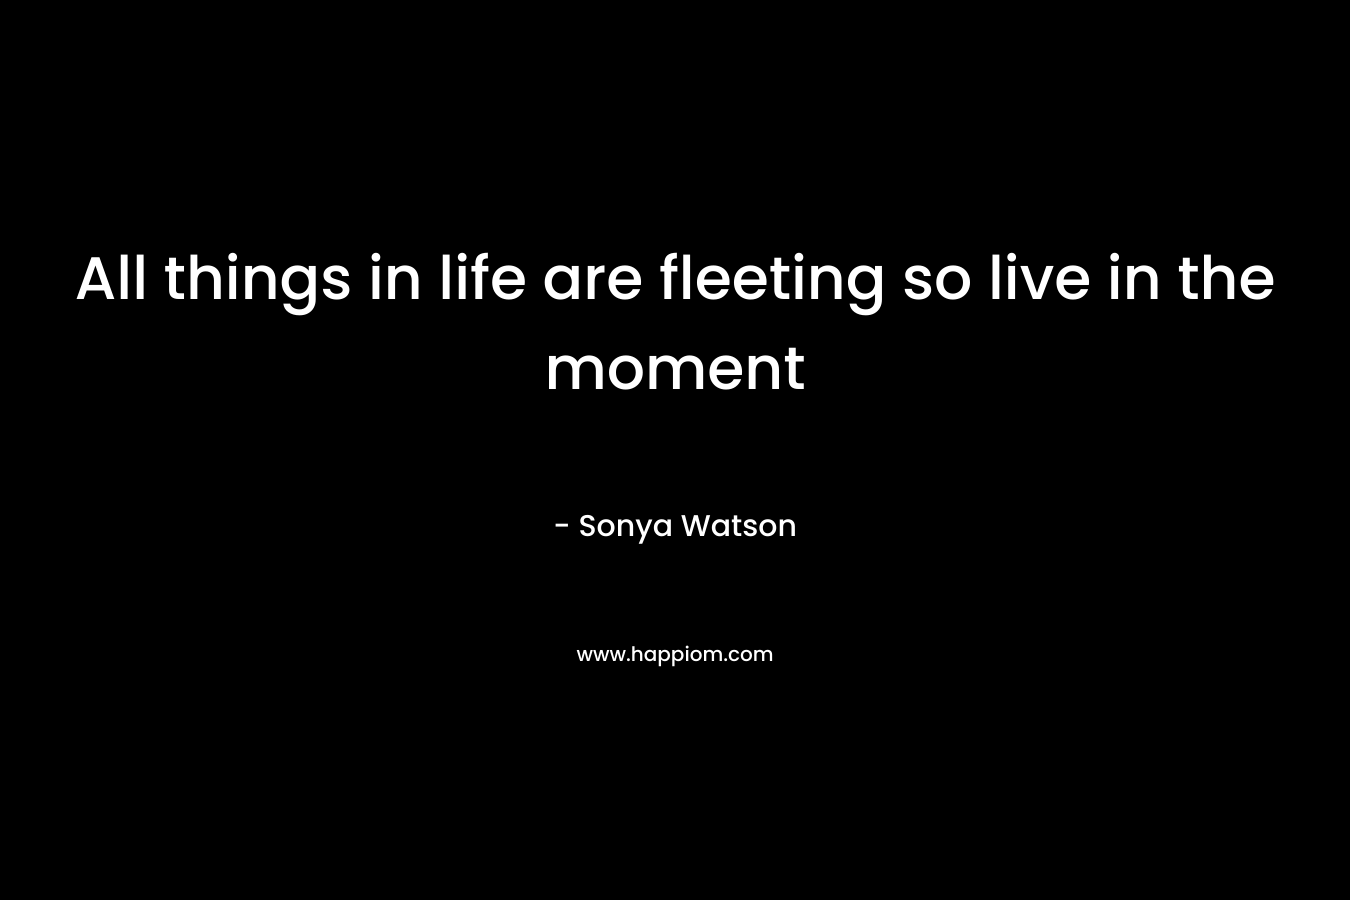 All things in life are fleeting so live in the moment